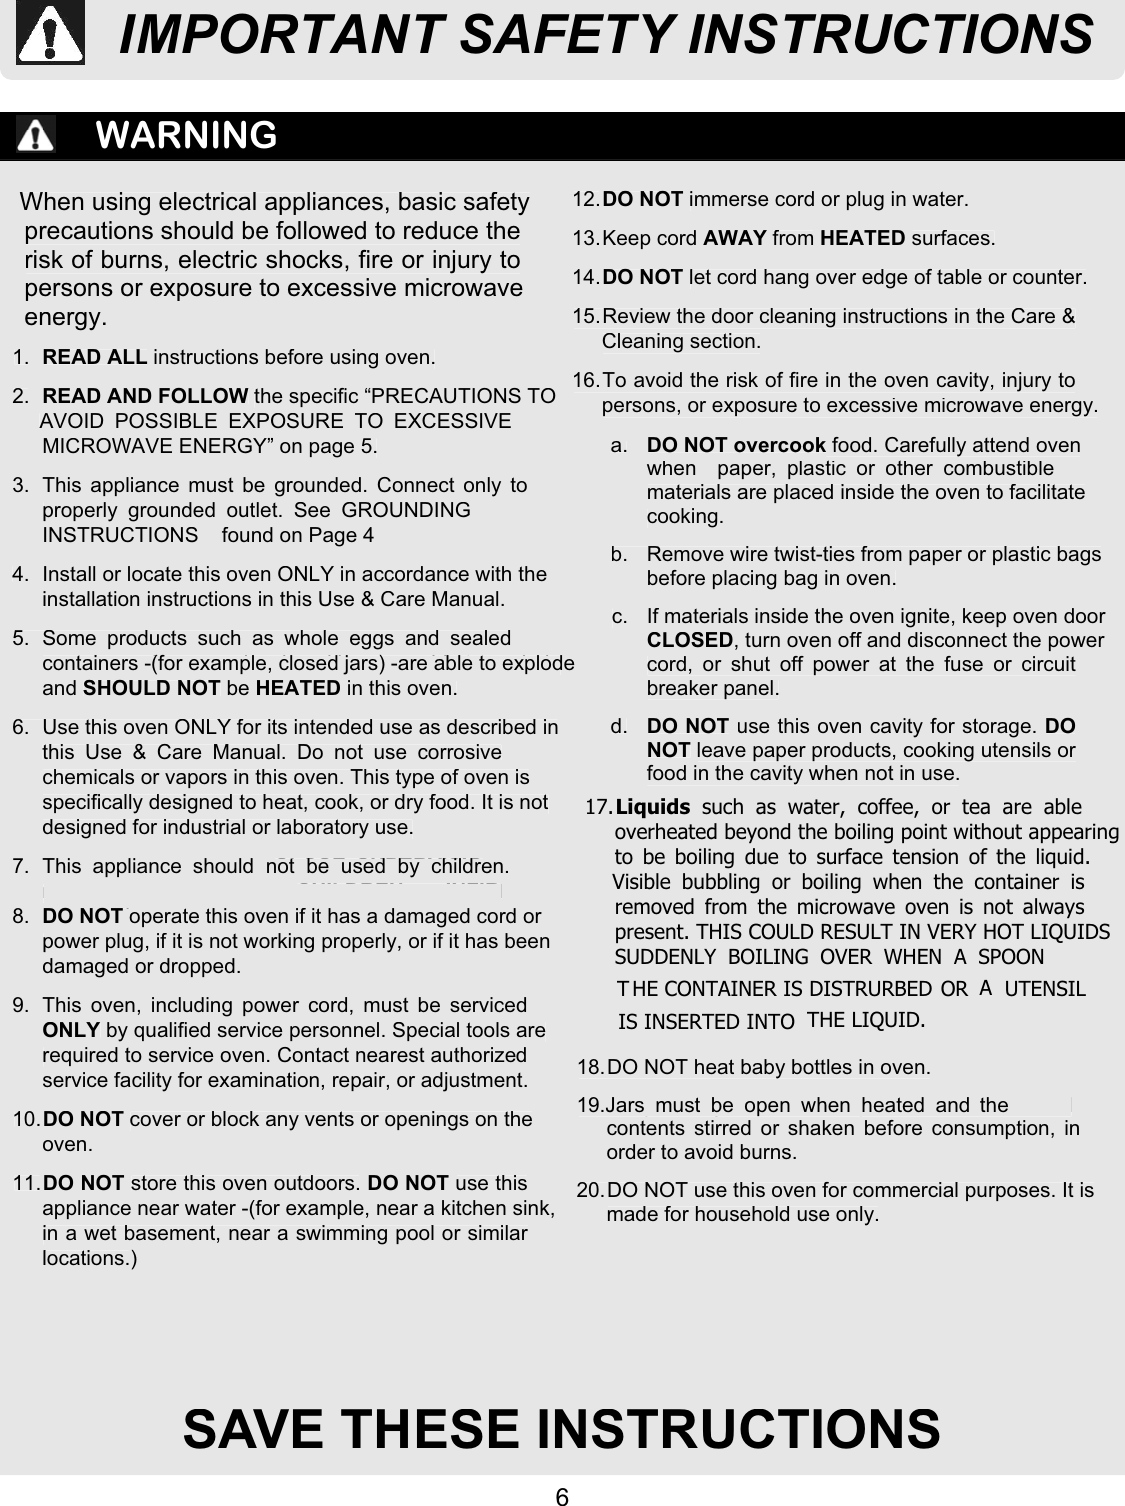 6SAVE THESE INSTRUCTIONSWARNINGWhen using electrical appliances, basic safetyprecautions should be followed to reduce therisk of burns, electric shocks, fire or injury topersons or exposure to excessive microwaveenergy.1. READ ALL instructions before using oven.2. READ AND FOLLOW the specific “PRECAUTIONS TOAVOID POSSIBLE EXPOSURE TO EXCESSIVEMICROWAVE ENERGY” on page 5.3.  This appliance must be grounded. Connect only toproperly grounded outlet. See GROUNDINGINSTRUCTIONS    found on Page 44.  Install or locate this oven ONLY in accordance with theinstallation instructions in this Use &amp; Care Manual.5. Some products such as whole eggs and sealedcontainers -for example, closed jars -are able to explodeand SHOULD NOT be HEATED in this oven.6.  Use this oven ONLY for its intended use as described inthis Use &amp; Care Manual. Do not use corrosivechemicals or vapors in this oven. This type of oven isspecifically designed to heat, cook, or dry food. It is notdesigned for industrial or laboratory use.7. As with any appliance, CLOSE SUPERVISIONnecessary when used by CHILDREN or INFIRMPERSONS8. DO NOT operate this oven if it has a damaged cord orpower plug, if it is not working properly, or if it has beendamaged or dropped.9.  This oven, including power cord, must be servicedONLY by qualified service personnel. Special tools arerequired to service oven. Contact nearest authorizedservice facility for examination, repair, or adjustment.10.DO NOT cover or block any vents or openings on theoven.11.DO NOT store this oven outdoors. DO NOT use thisappliance near water -for example, near a kitchen sink,in a wet basement, near a swimming pool or similarlocations.12.DO NOT immerse cord or plug in water.13. Keep  cord AWAY from HEATED surfaces.14.DO NOT let cord hang over edge of table or counter.15. Review the door cleaning instructions in the Care &amp;Cleaning section.16. To avoid the risk of fire in the oven cavity, injury topersons, or exposure to excessive microwave energy.a. DO NOT overcook food. Carefully attend ovenwhen  paper, plastic or other combustiblematerials are placed inside the oven to facilitatecooking.b.  Remove wire twist-ties from paper or plastic bagsbefore placing bag in oven.c.  If materials inside the oven ignite, keep oven doorCLOSED, turn oven off and disconnect the powercord, or shut off power at the fuse or circuitbreaker panel.d. DO NOT use this oven cavity for storage. DONOT leave paper products, cooking utensils orfood in the cavity when not in use.18. DO NOT heat baby bottles in oven.19. Baby food jars shall be open when heated andcontents stirred or shaken before consumption, inorder to avoid burns.20. DO NOT use this oven for commercial purposes. It ismade for household use only.SAVE THESE INSTRUCTIONSWhen using electrical appliances, basic safetyprecautions should be followed to reduce therisk of burns, electric shocks, fire or injury topersons or exposure to excessive microwaveenergy.1.READ ALLinstructions before using oven.2.READ AND FOLLOW the specific “PRECAUTIONS TOAVOID POSSIBLE EXPOSURE TO EXCESSIVEMICROWAVE ENERGY” on page 5.3.  This appliance must be grounded. Connect only toproperly grounded outlet. See GROUNDINGINSTRUCTIONS    found on Page 44.  Install or locate this oven ONLY in accordance with theinstallation instructions in this Use &amp; Care Manual.5. Some products such as whole eggs and sealedcontainers -(for example, closed jars) -are able to explodeandSHOULD NOTbeHEATEDin this oven.6. Use this oven ONLY for its intended use as described inthis Use &amp; Care Manual. Do not use corrosivechemicals or vapors in this oven. This type of oven isspecifically designed to heat, cook, or dry food. It is notdesigned for industrial or laboratory use.7. 8.DO NOT operate this oven if it has a damaged cord orpower plug, if it is not working properly, or if it has beendamaged or dropped.9.  This oven, including power cord, must be servicedONLYby qualified service personnel. Special tools arerequired to service oven. Contact nearest authorizedservice facility for examination, repair, or adjustment.10.DO NOTcover or block any vents or openings on theoven.11.DO NOT store this oven outdoors.DO NOTuse thisappliance near water - or example, near a kitchen sink,in a wet basement, near a swimming pool or similarlocations.12.DO NOTimmerse cord or plug in water.13. Keep  cordAWAYfromHEATEDsurfaces.14.DO NOTlet cord hang over edge of table or counter.15. Review the door cleaning instructions in the Care &amp;Cleaning section.16. To avoid the risk of fire in the oven cavity, injury topersons, or exposure to excessive microwave energy.a.DO NOT overcook food. Carefully attend ovenwhen  paper, plastic or other combustiblematerials are placed inside the oven to facilitatecooking.b.  Remove wire twist-ties from paper or plastic bagsbefore placing bag in oven.c. If materials inside the oven ignite, keep oven doorCLOSED, turn oven off and disconnect the powercord, or shut off power at the fuse or circuitbreaker panel.d.DO NOTuse this oven cavity for storage. DONOTleave paper products, cooking utensils orfood in the cavity when not in use.18. DO NOT heat baby bottles in oven.19. ars   be open when heated andcontents stirred or shaken before consumption, inorder to avoid burns.20. DO NOT use this oven for commercial purposes. It ismade for household use only.IMPORTANT SAFETY INSTRUCTIONS17.Liquids such as water, coffee, or tea are ableoverheated beyond the boiling point without appearingto be boiling due to surface tension of the liquid.Visible bubbling or boiling when the container isremoved from the microwave oven is not alwayspresent. THIS COULD RESULT IN VERY HOT LIQUIDSSUDDENLY BOILING OVER WHEN A SPOON OR UTENSIL IS INSERTED INTO  THE LIQUID.T HE CONTAINER IS DISTRURBED  AThis  appliance  should  not  be  used  by  children.(f)J must  the